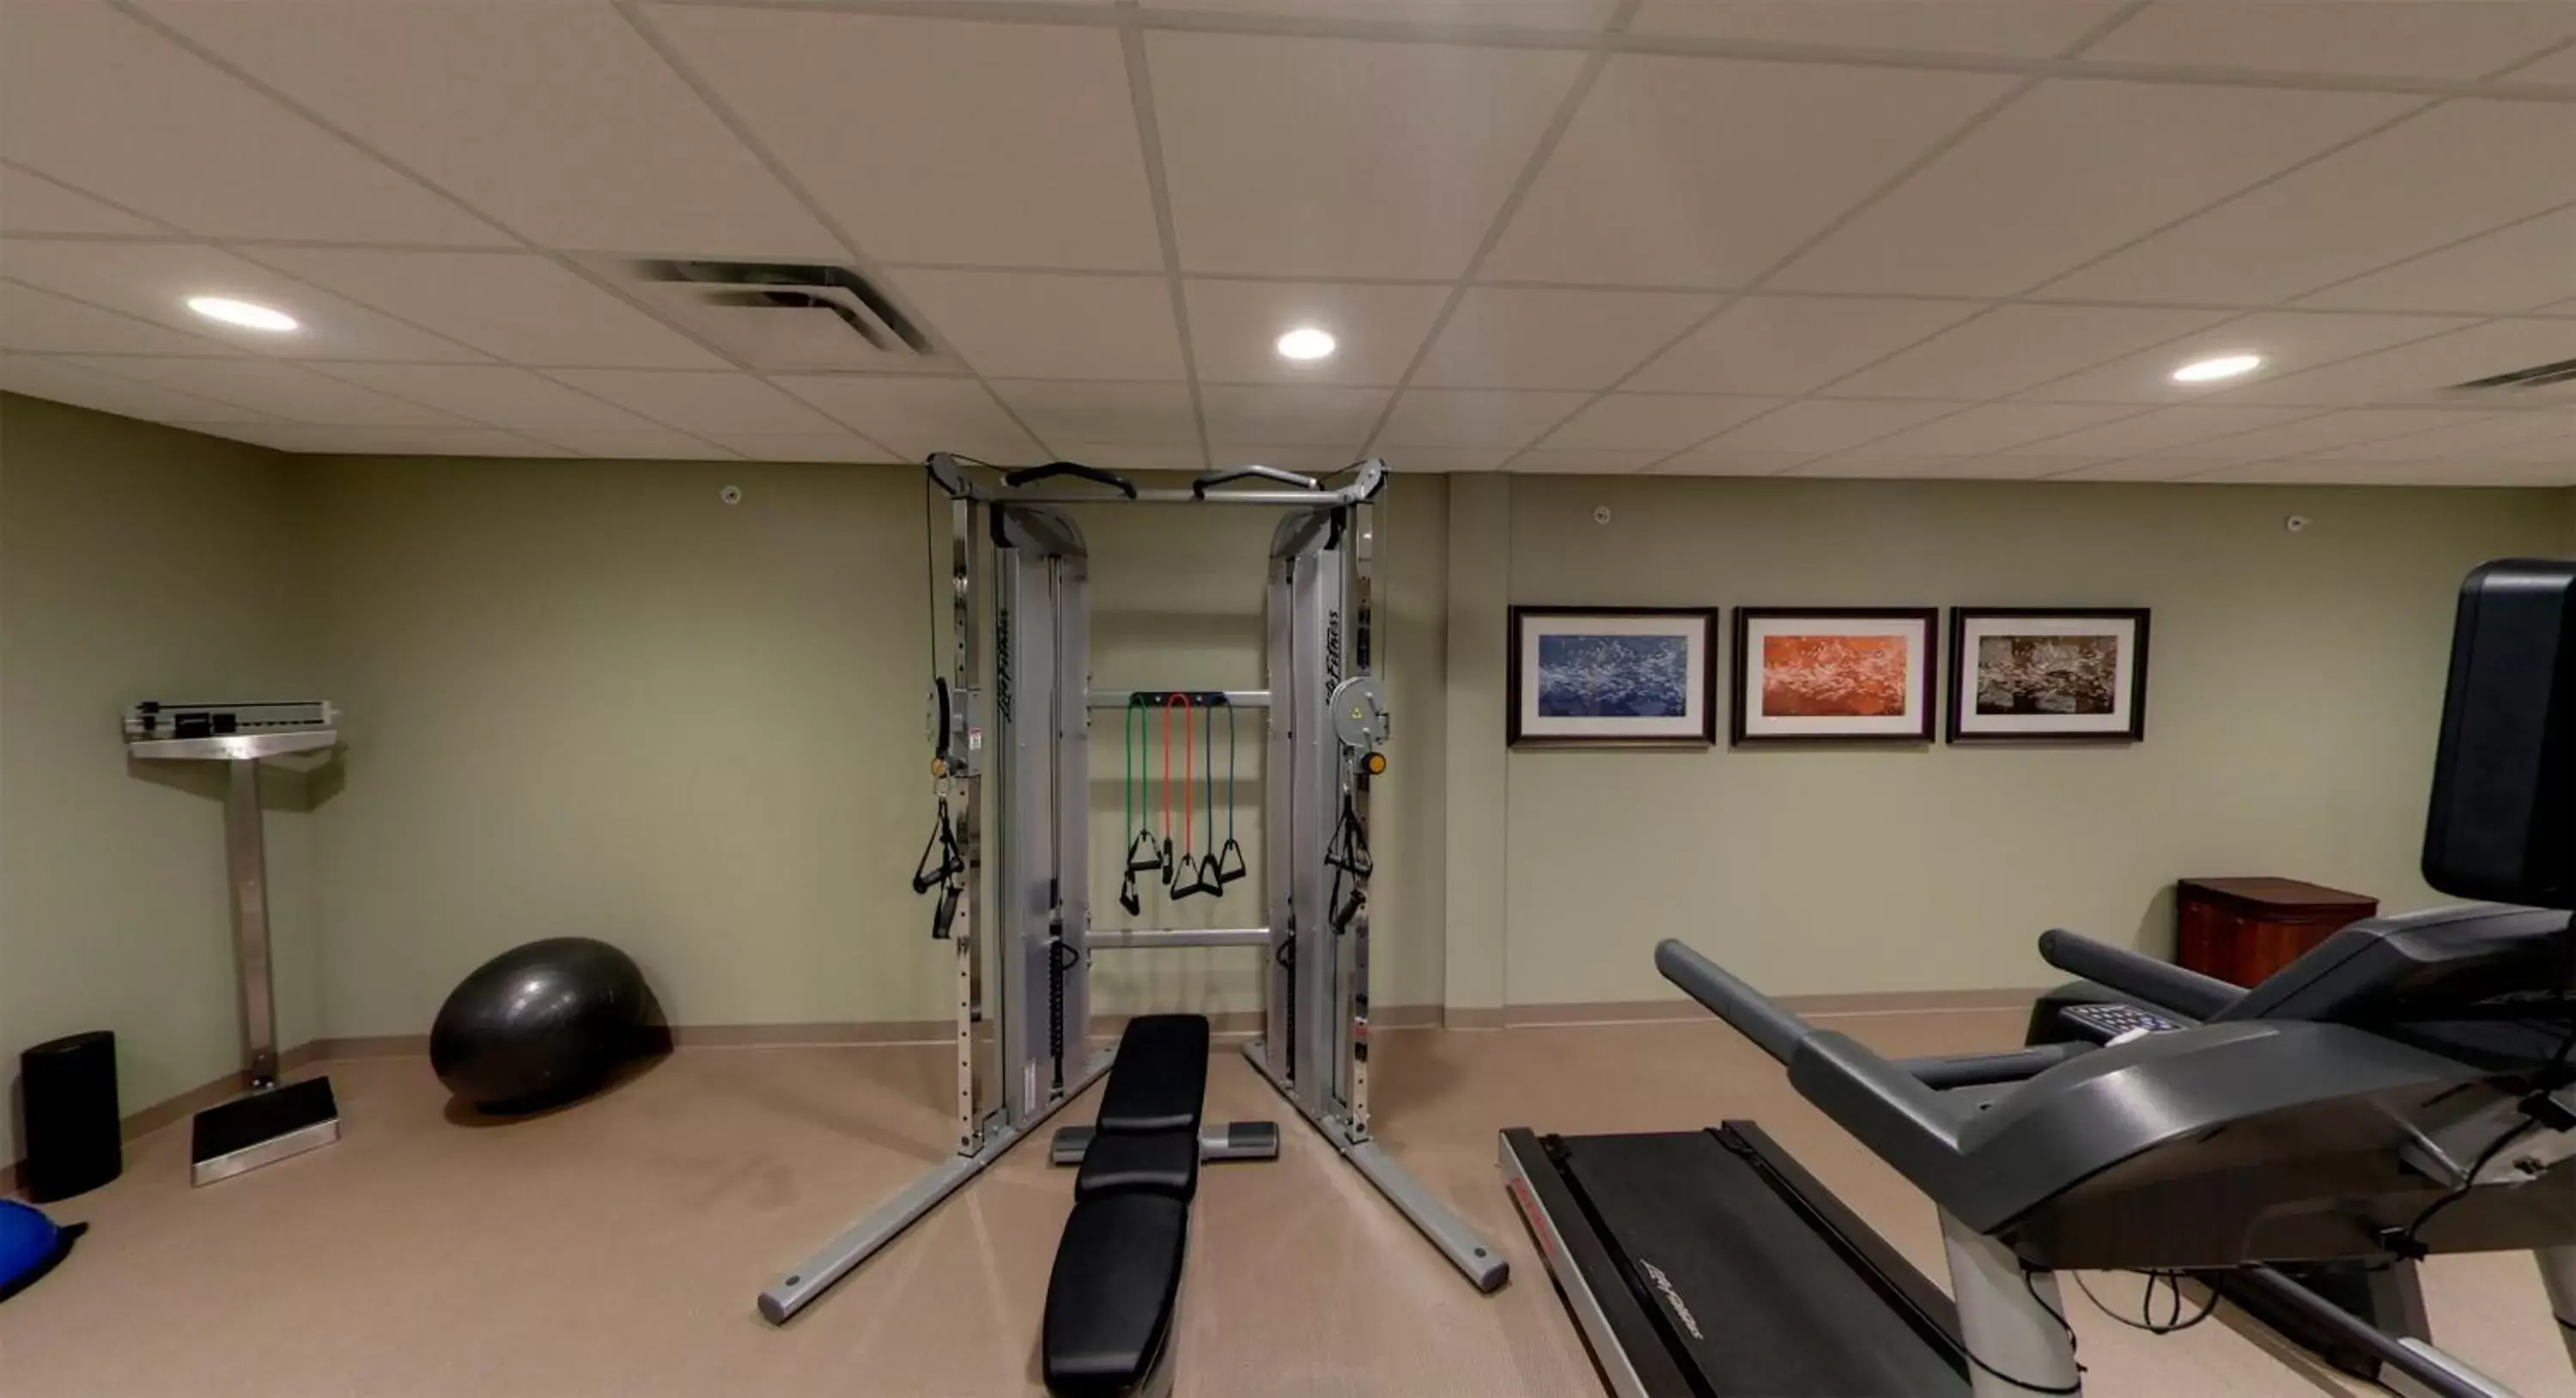 Fitness centre/facilities, Fitness Center/Facilities in Staybridge Suites Ann Arbor - Research Parkway, an IHG Hotel